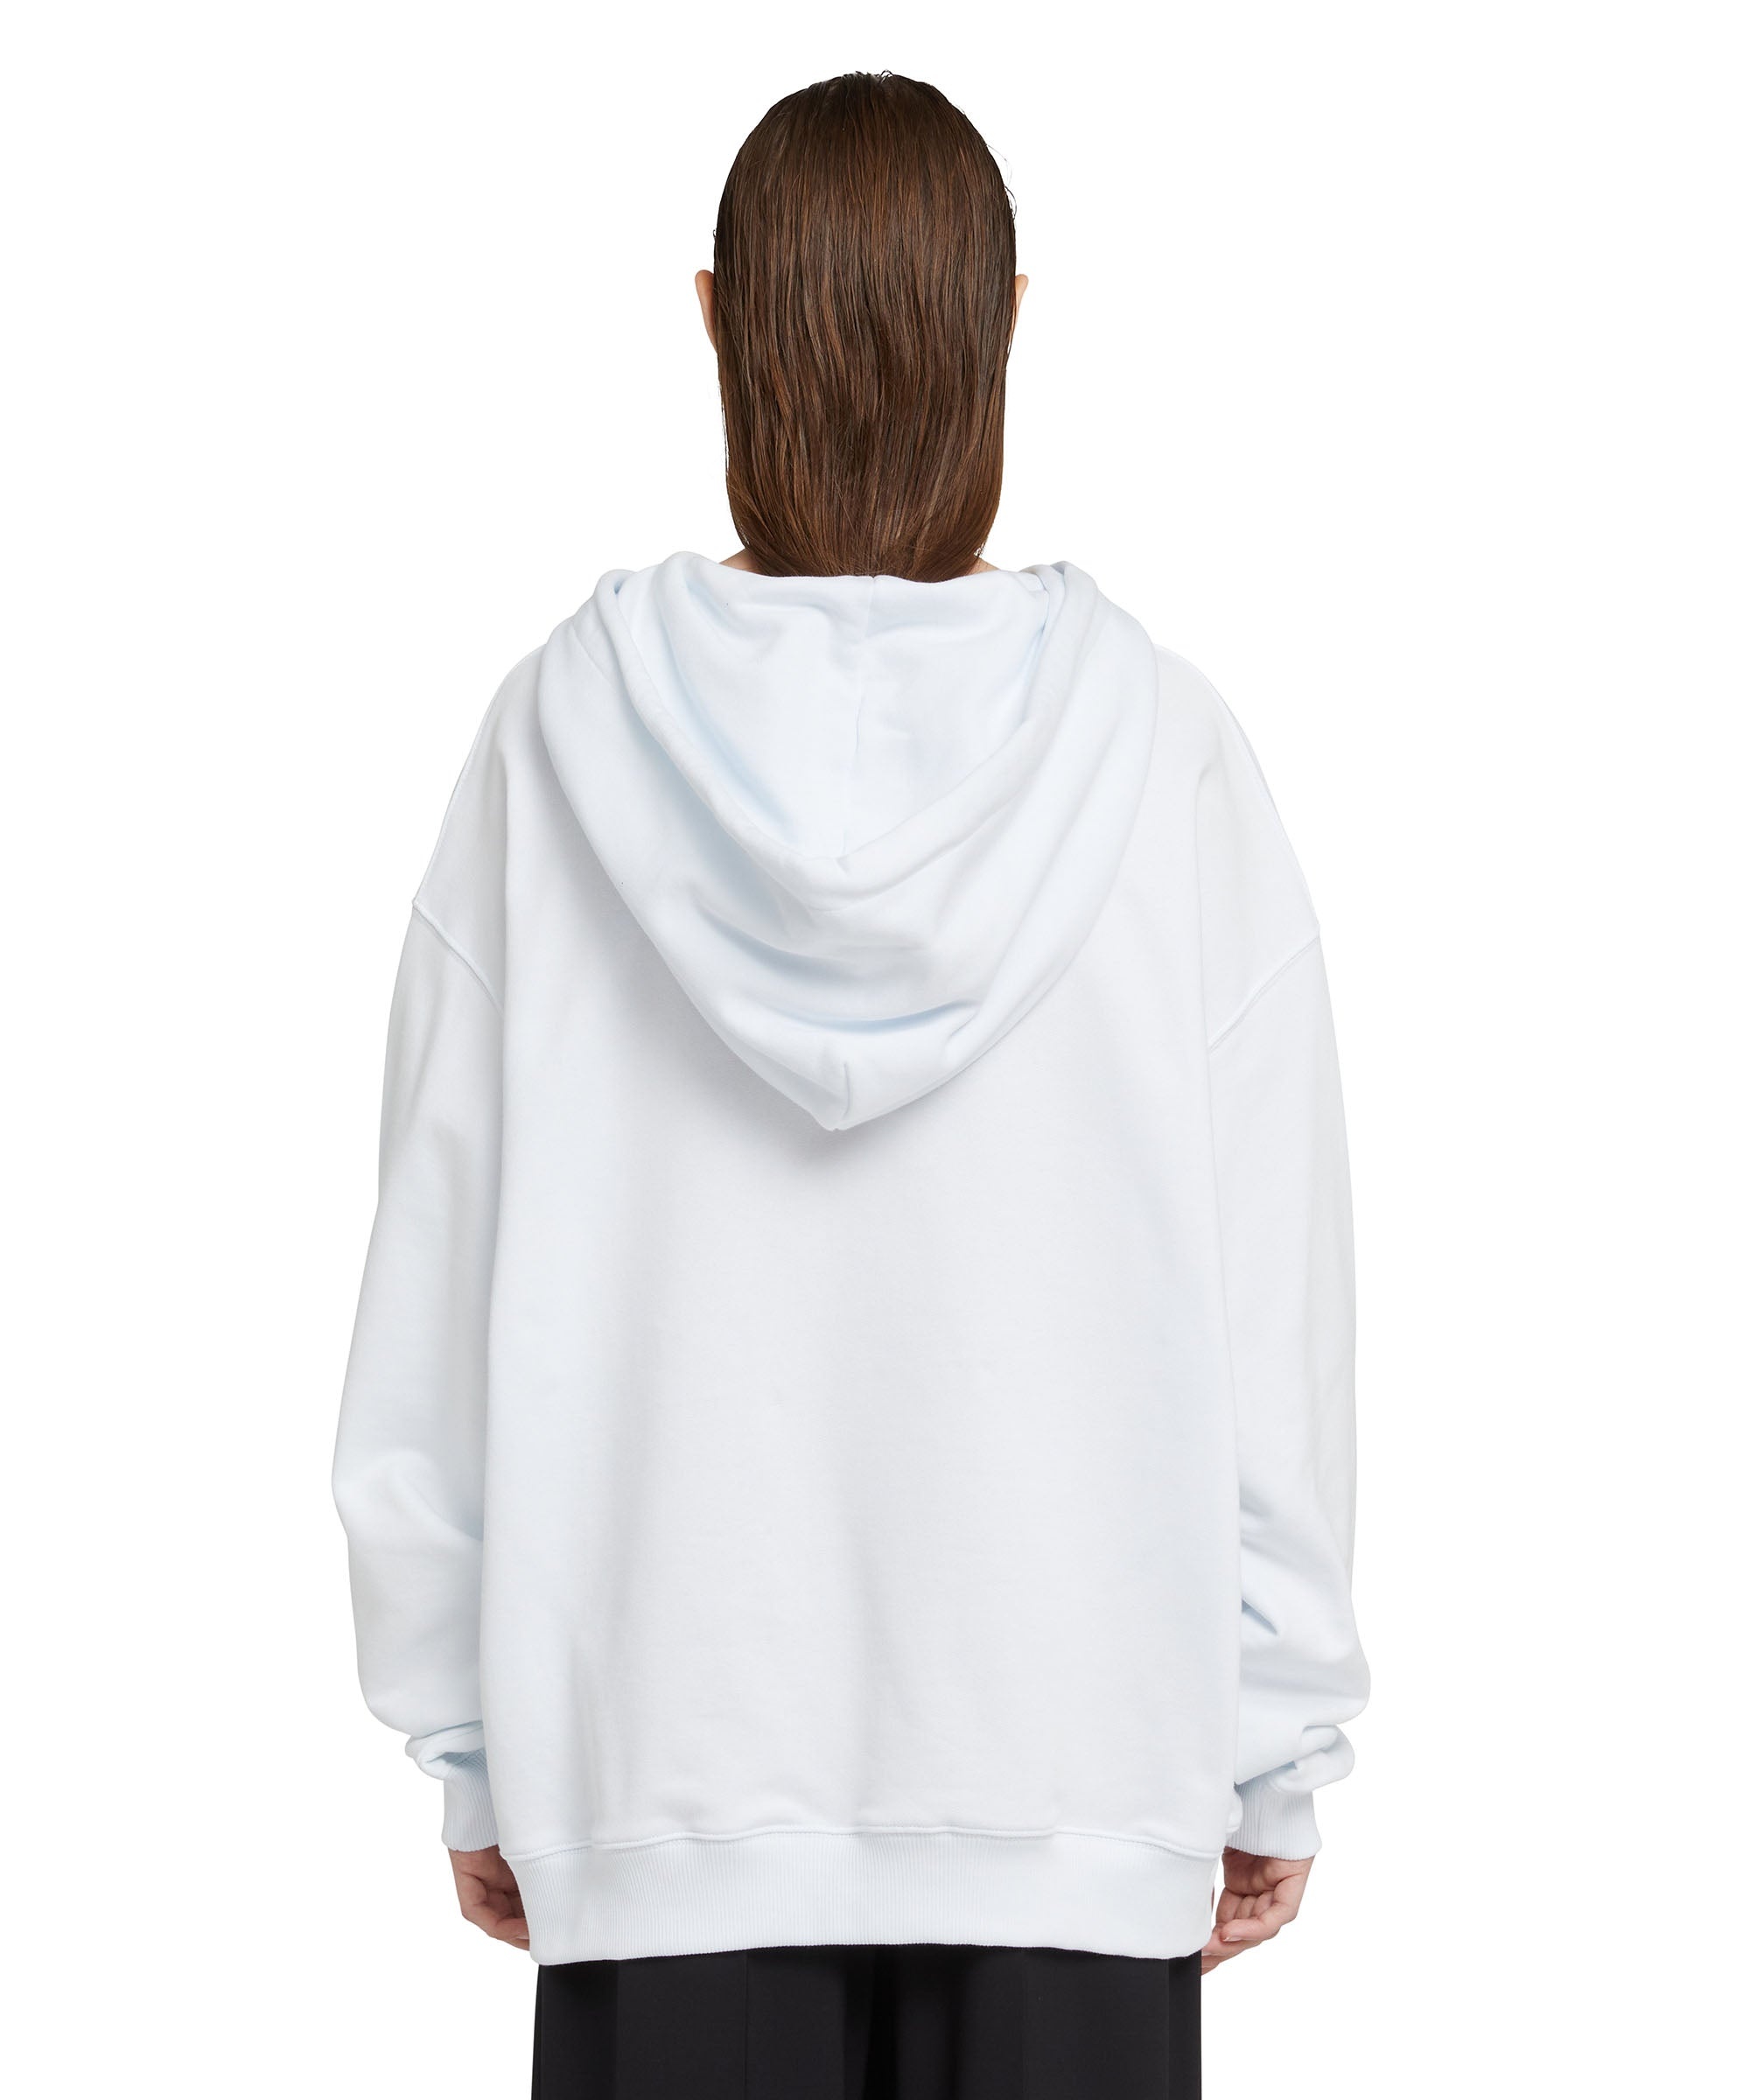 Hooded sweatshirt with "Street style" graphic - 3